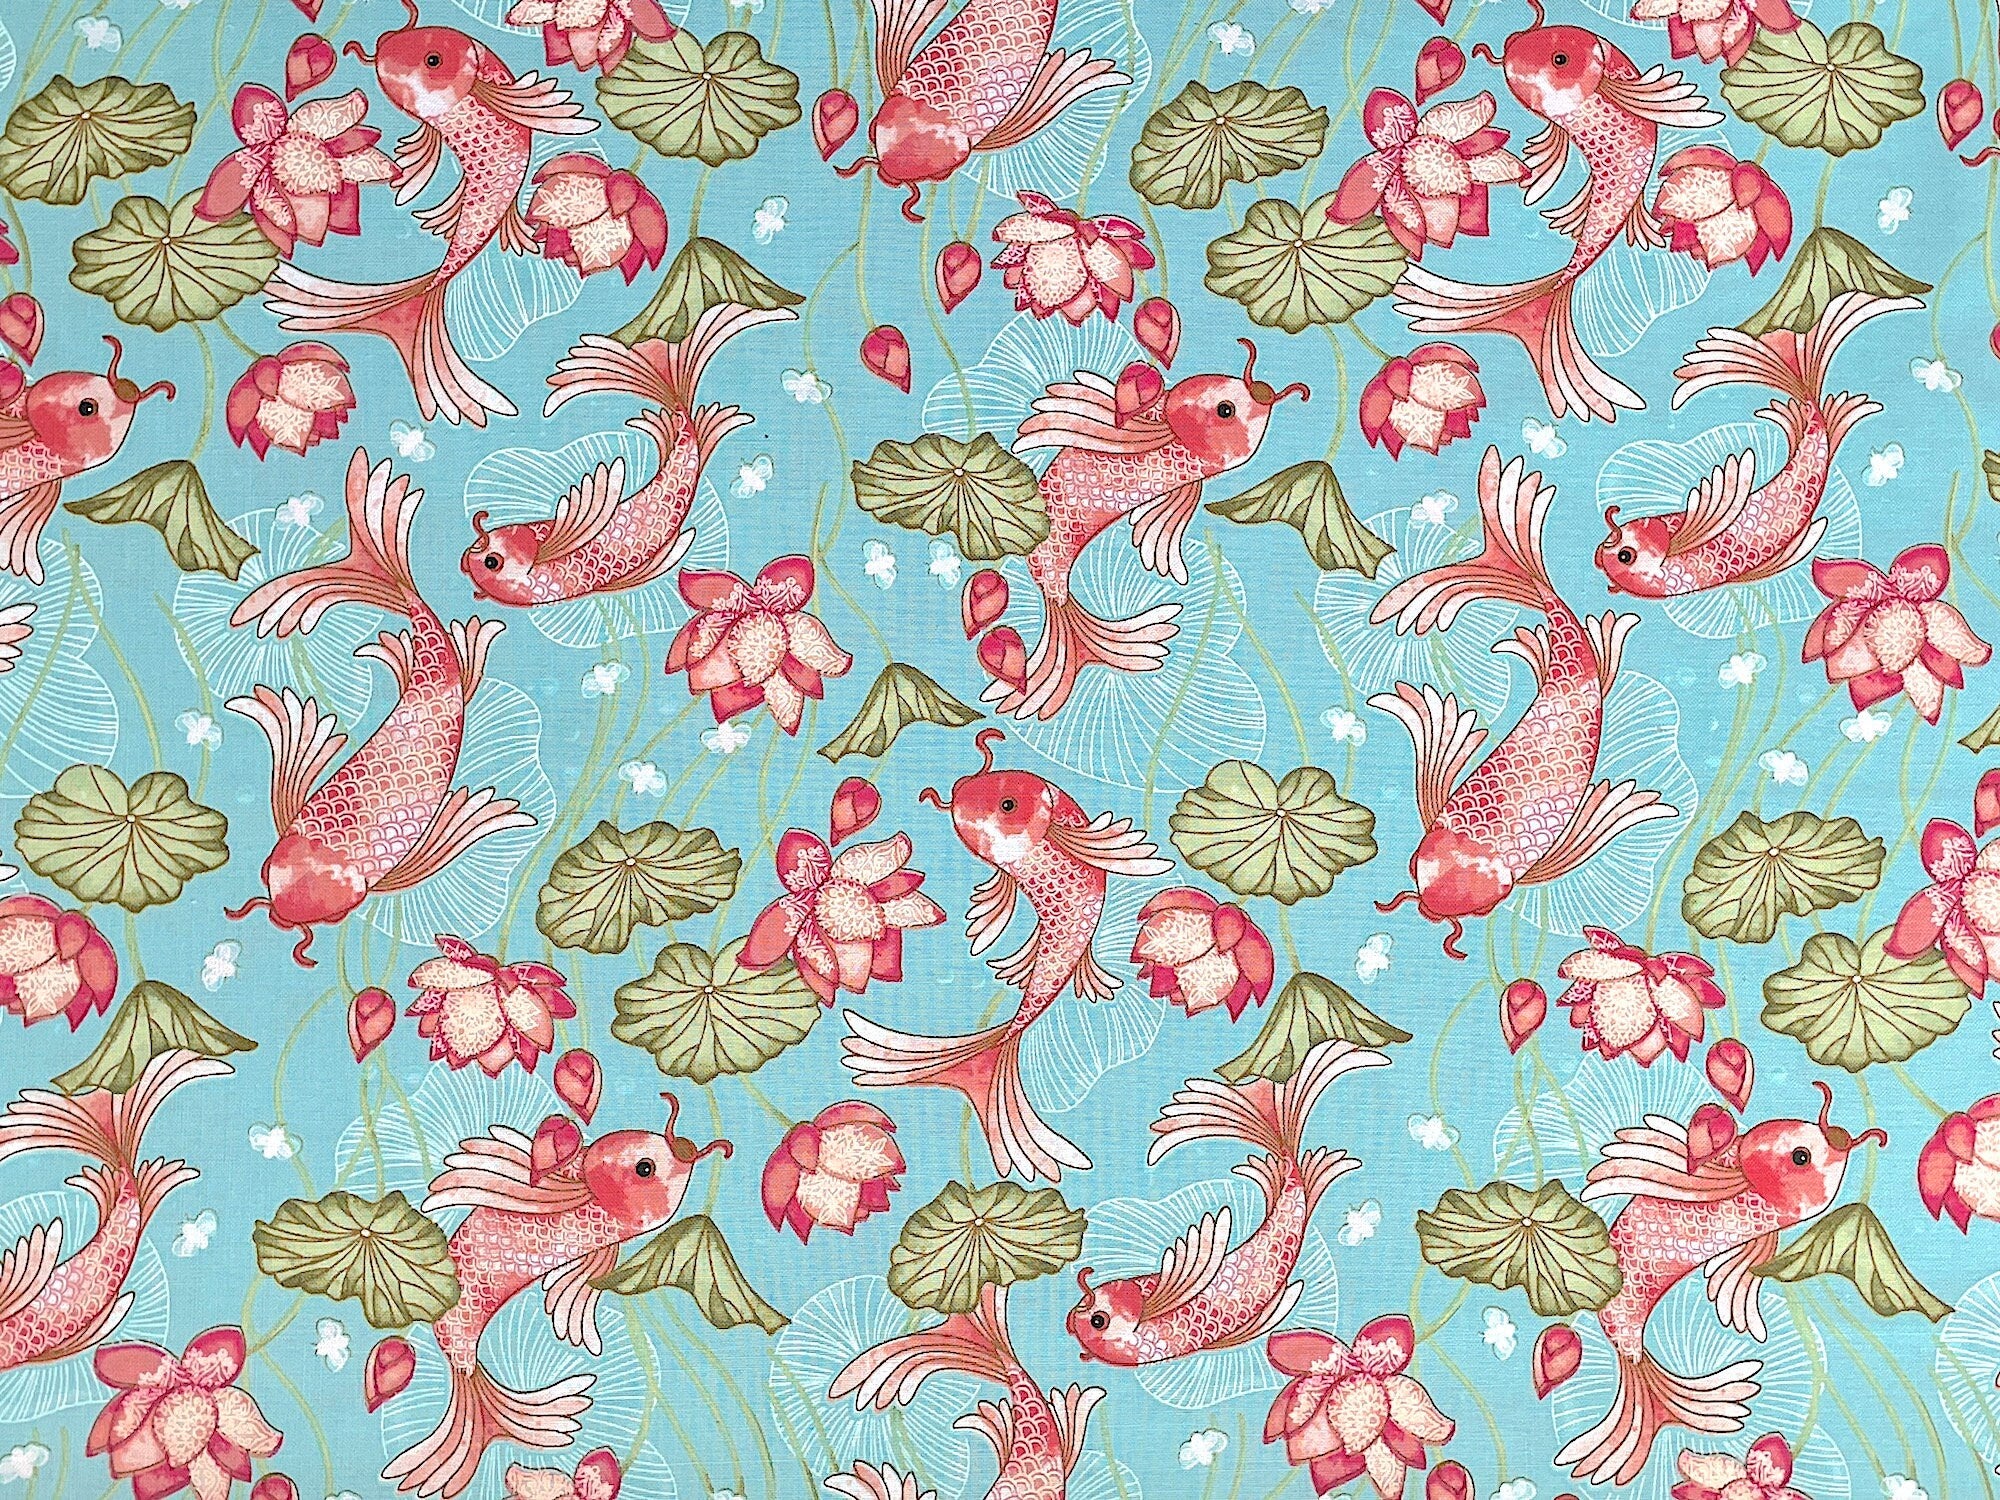 This fabric is part of the Koi Garden collection by Nancy Archer. This light teal cotton fabric is covered with orange koi and water lilies